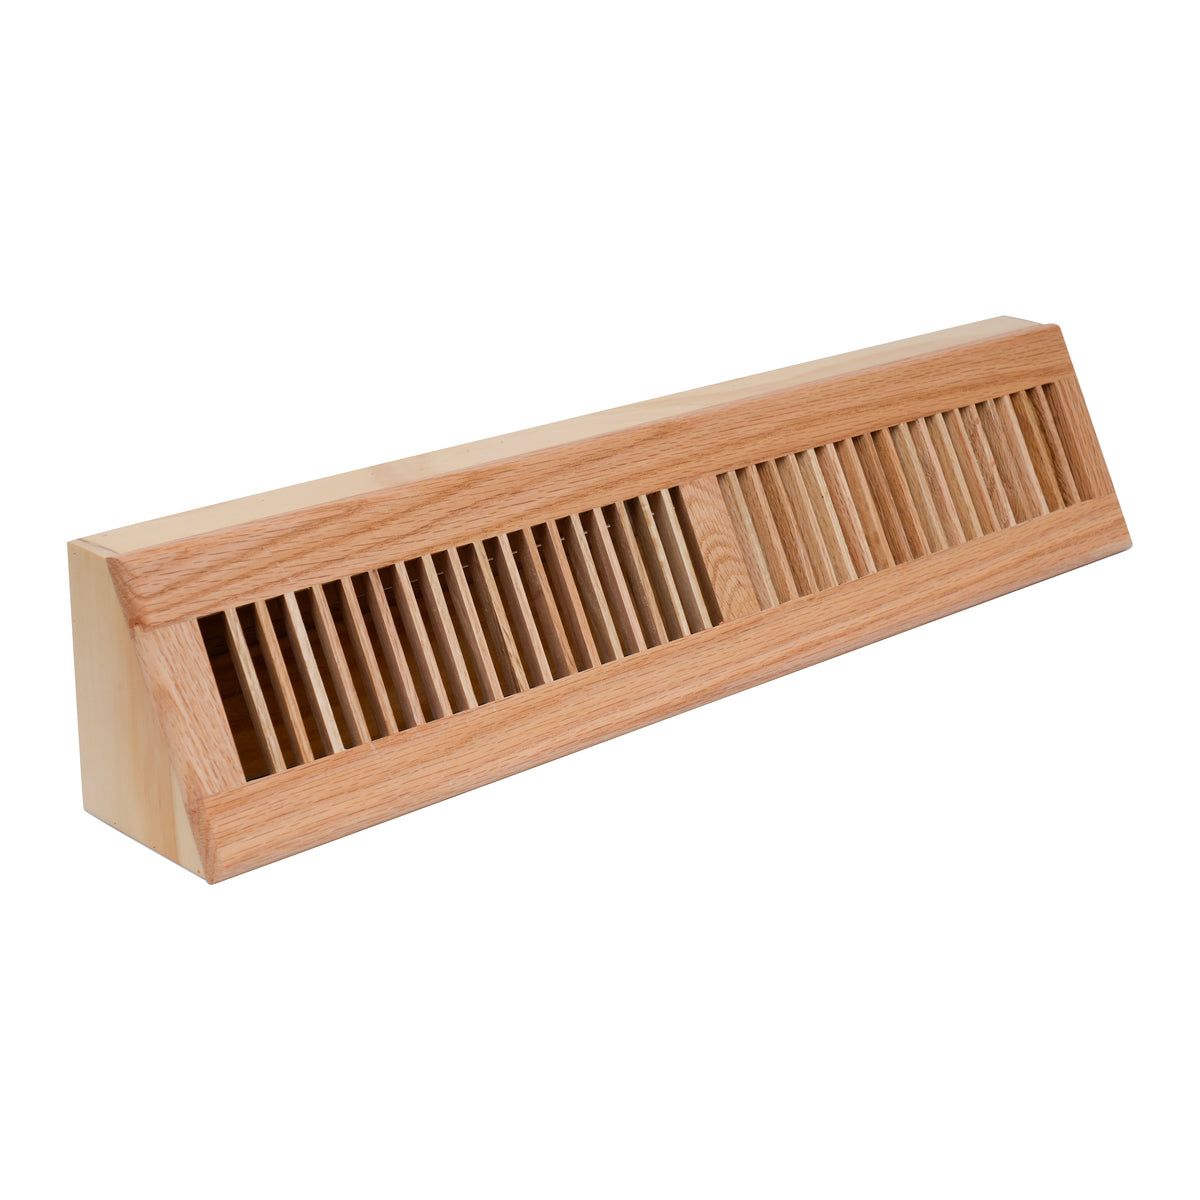 24" Wooden Baseboard Floor Register | Return Air Grille | Decorative Air Supply Vent Cover | Pre-Finished Natural Red Oak Wood Air Diffuser